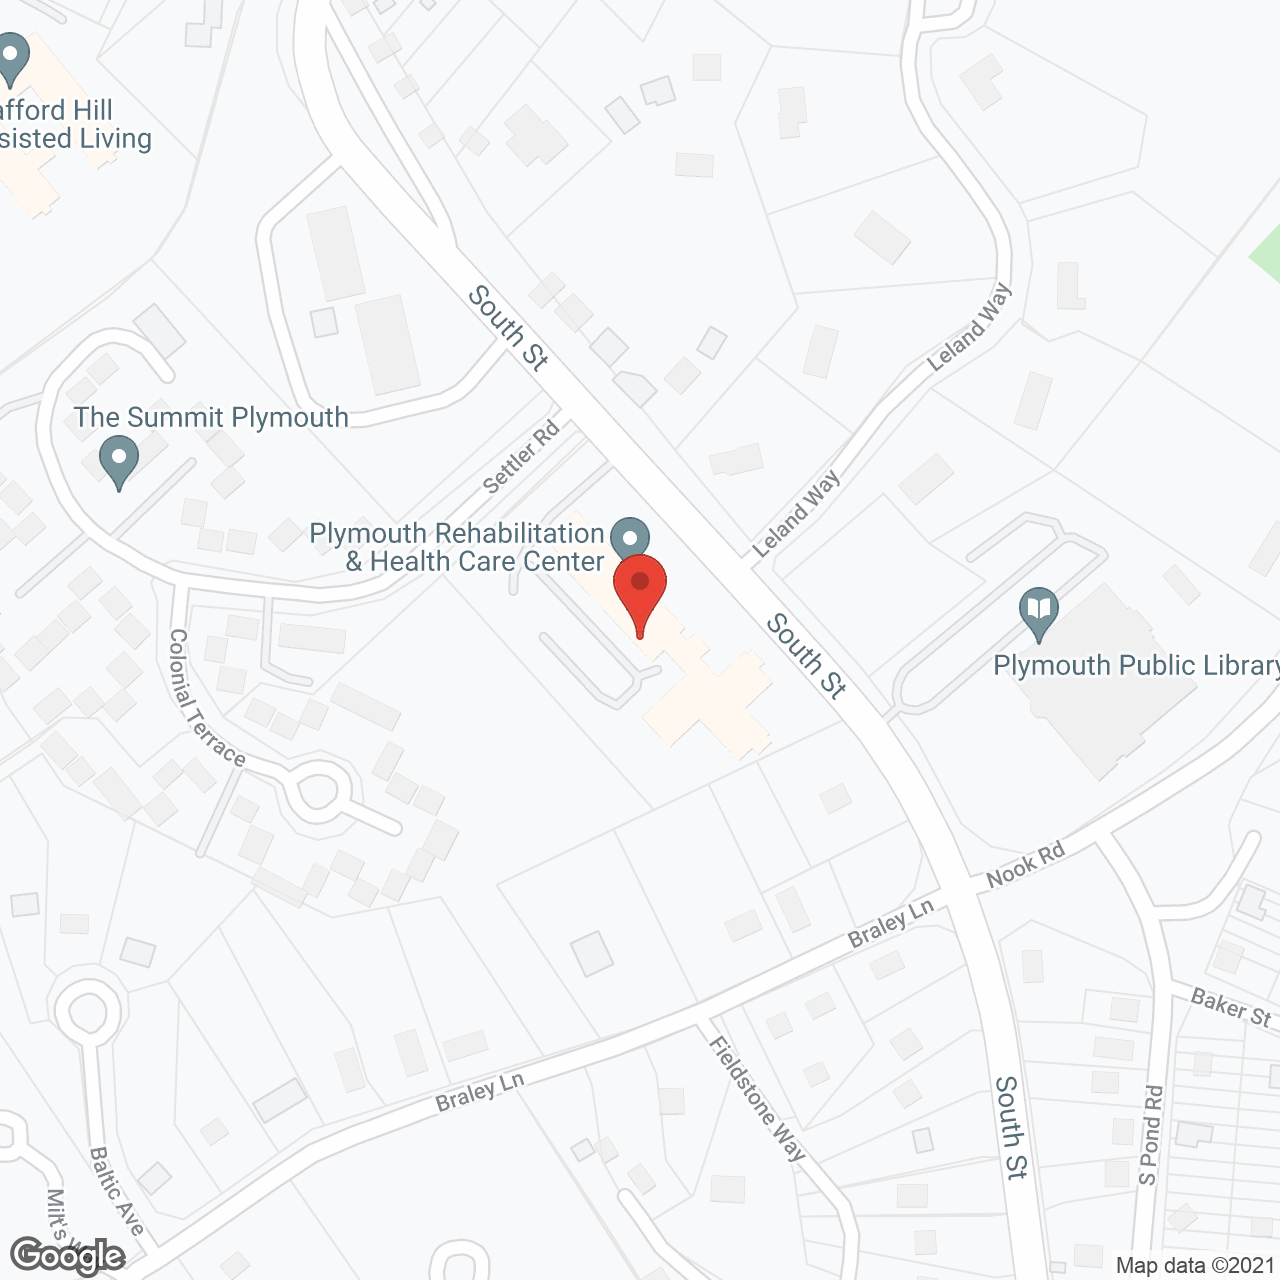 Plymouth Rehabilitation and Skilled Nursing C in google map